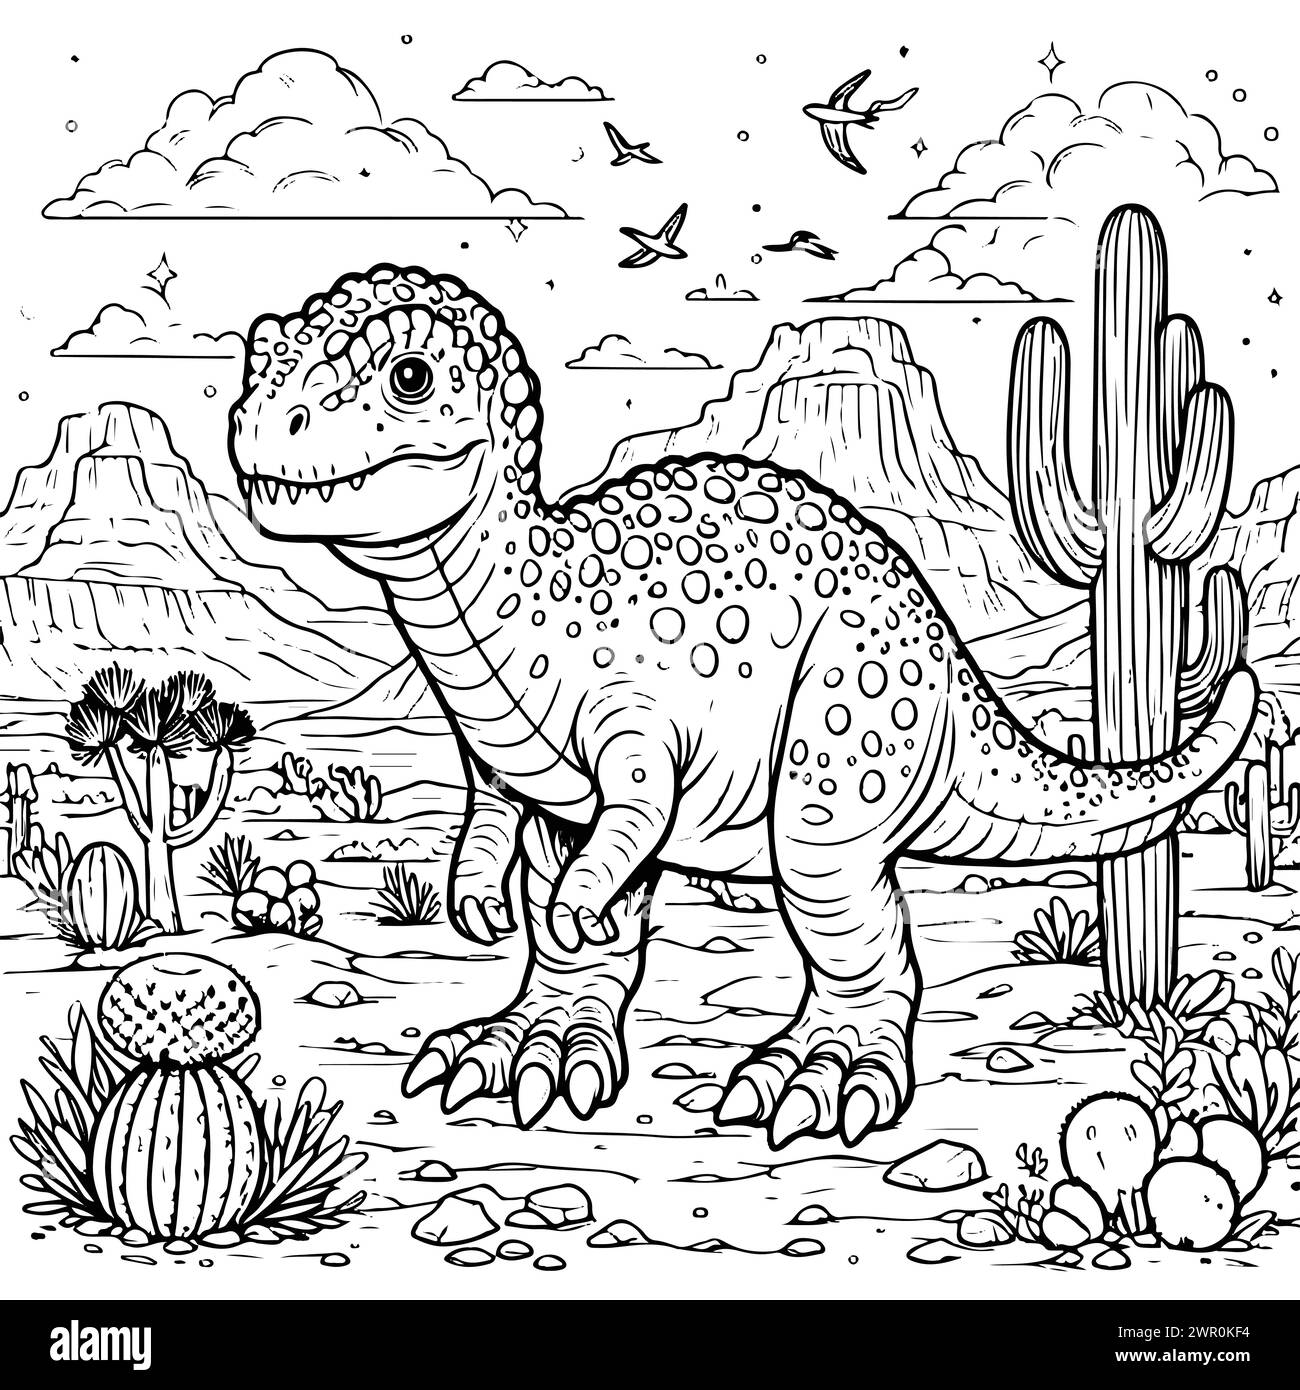 coloring draw dinosaur with a desert background and cactus.black and white version good for kids Stock Vector